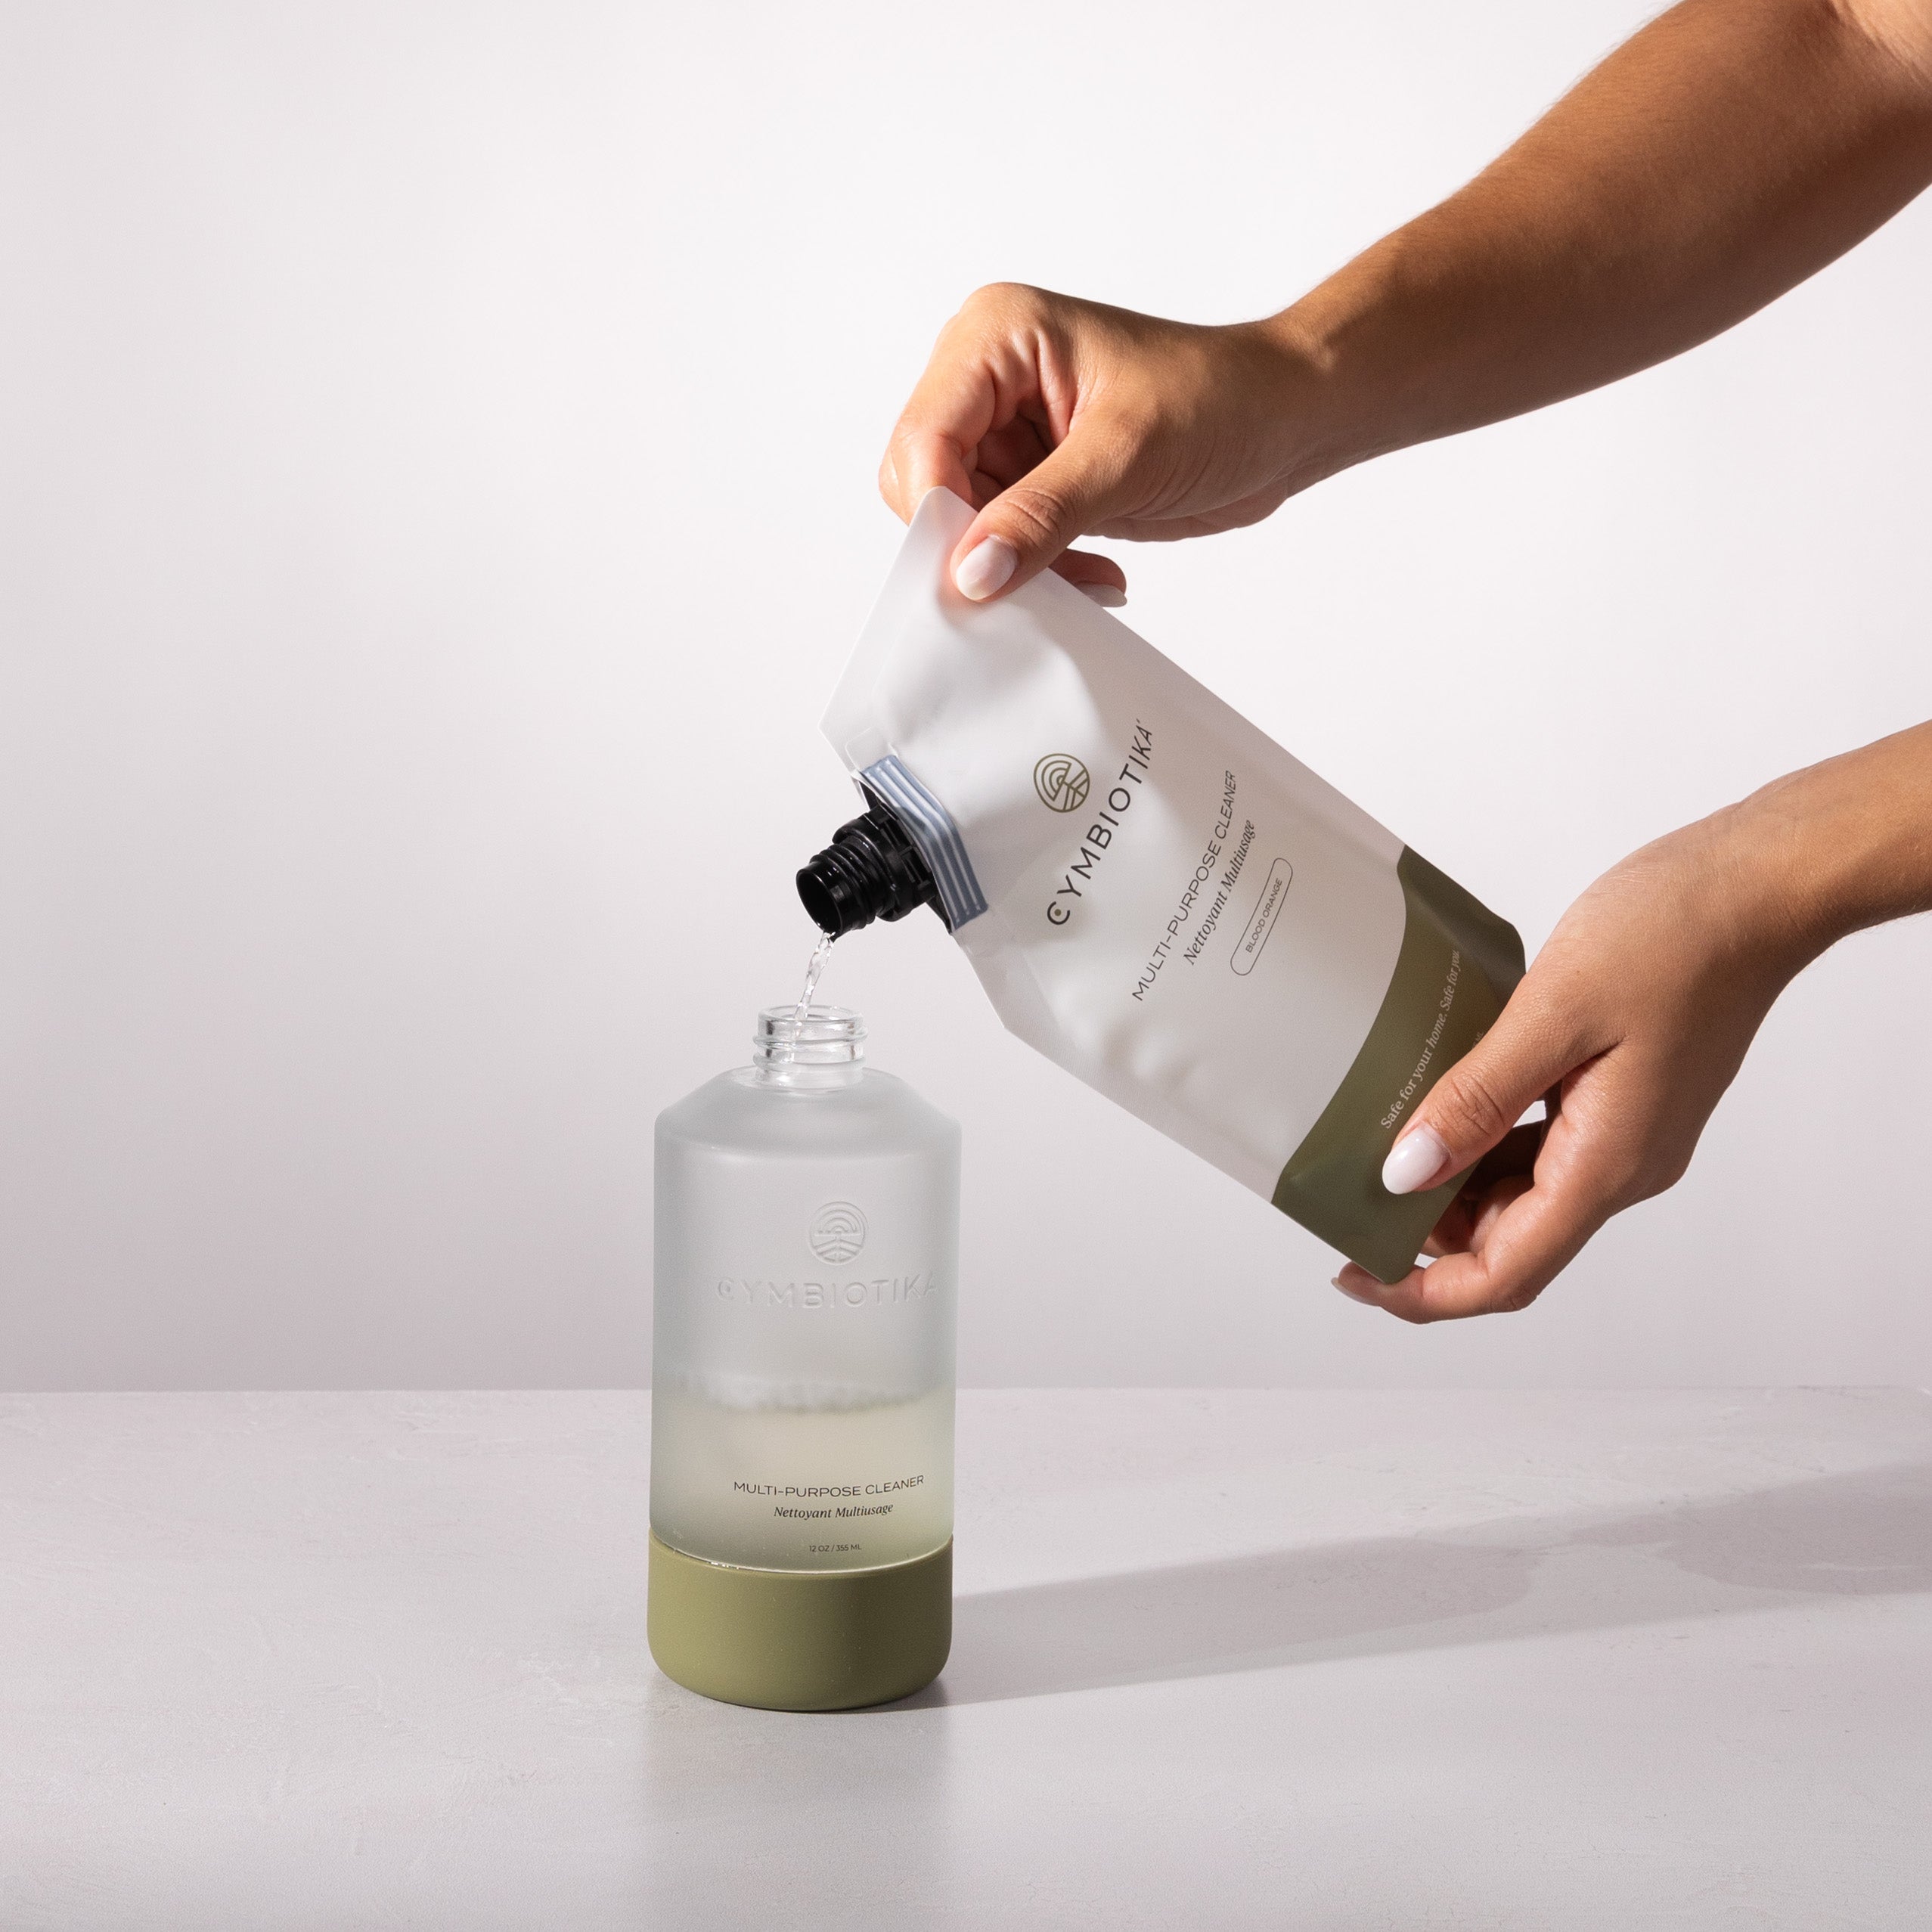 Multi-Purpose Cleaner Bottle Getting Refilled